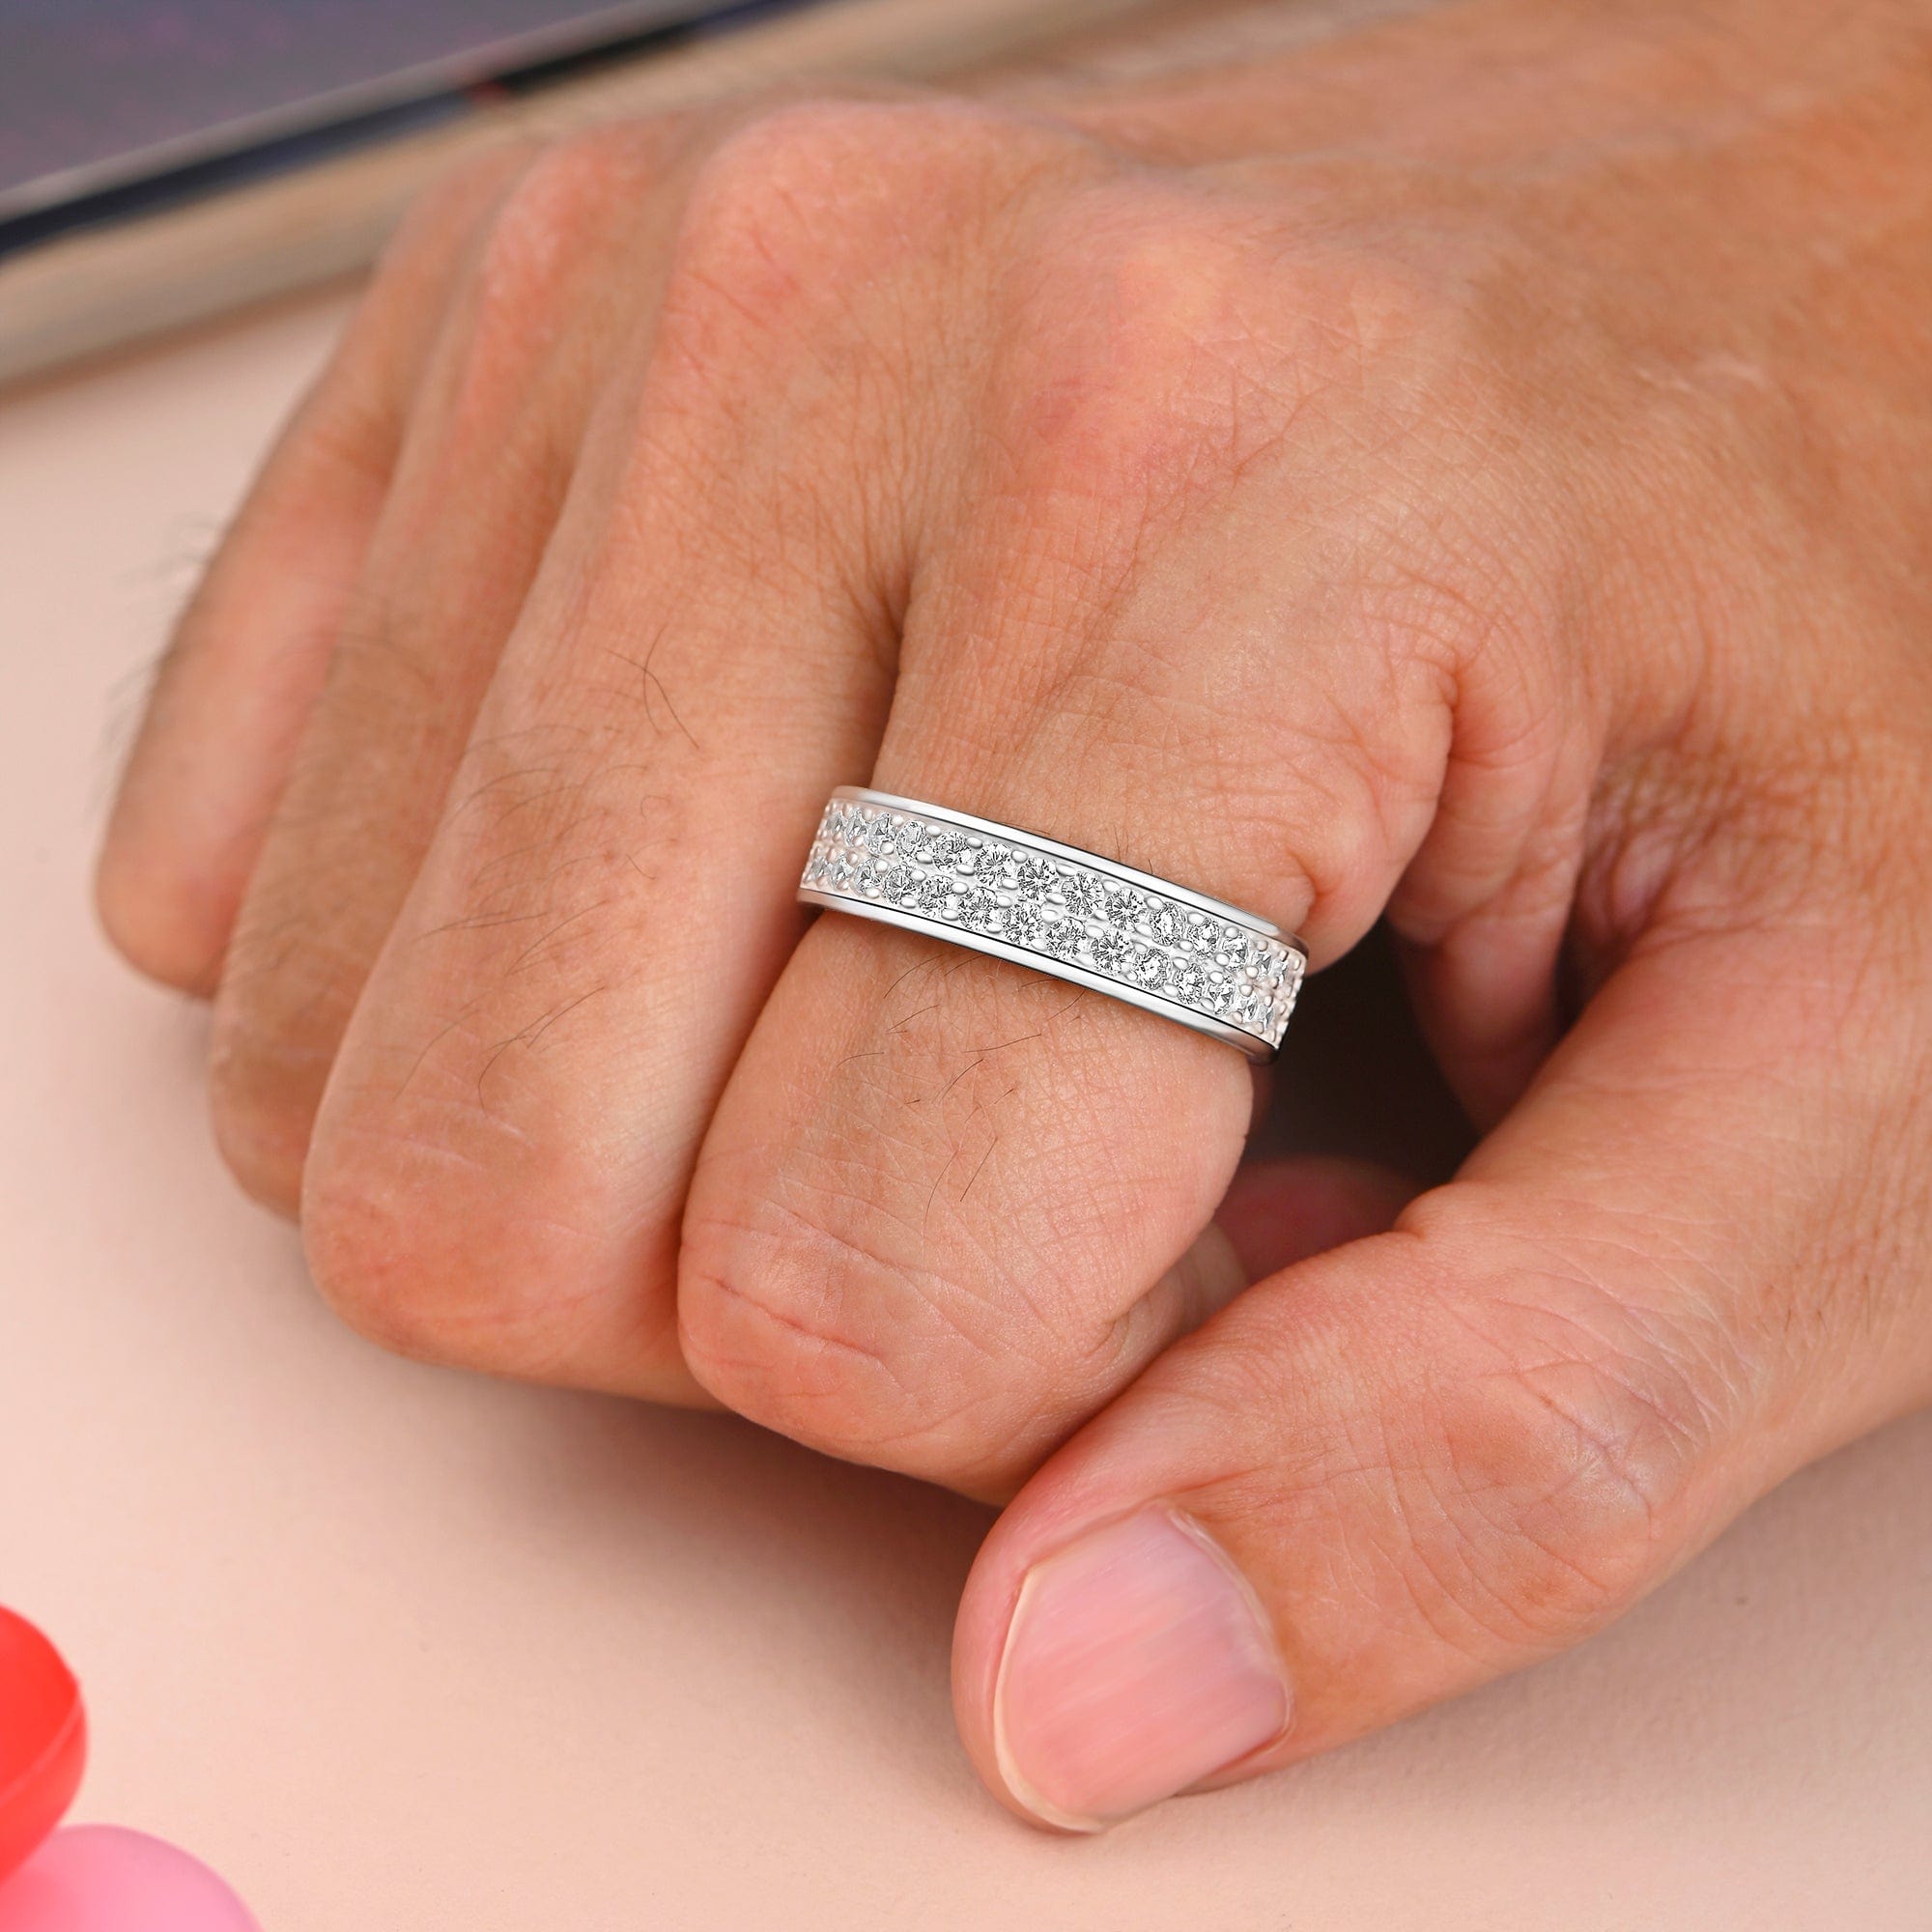 Types of Men's Diamond Rings: A Quick Guide - ItsHot